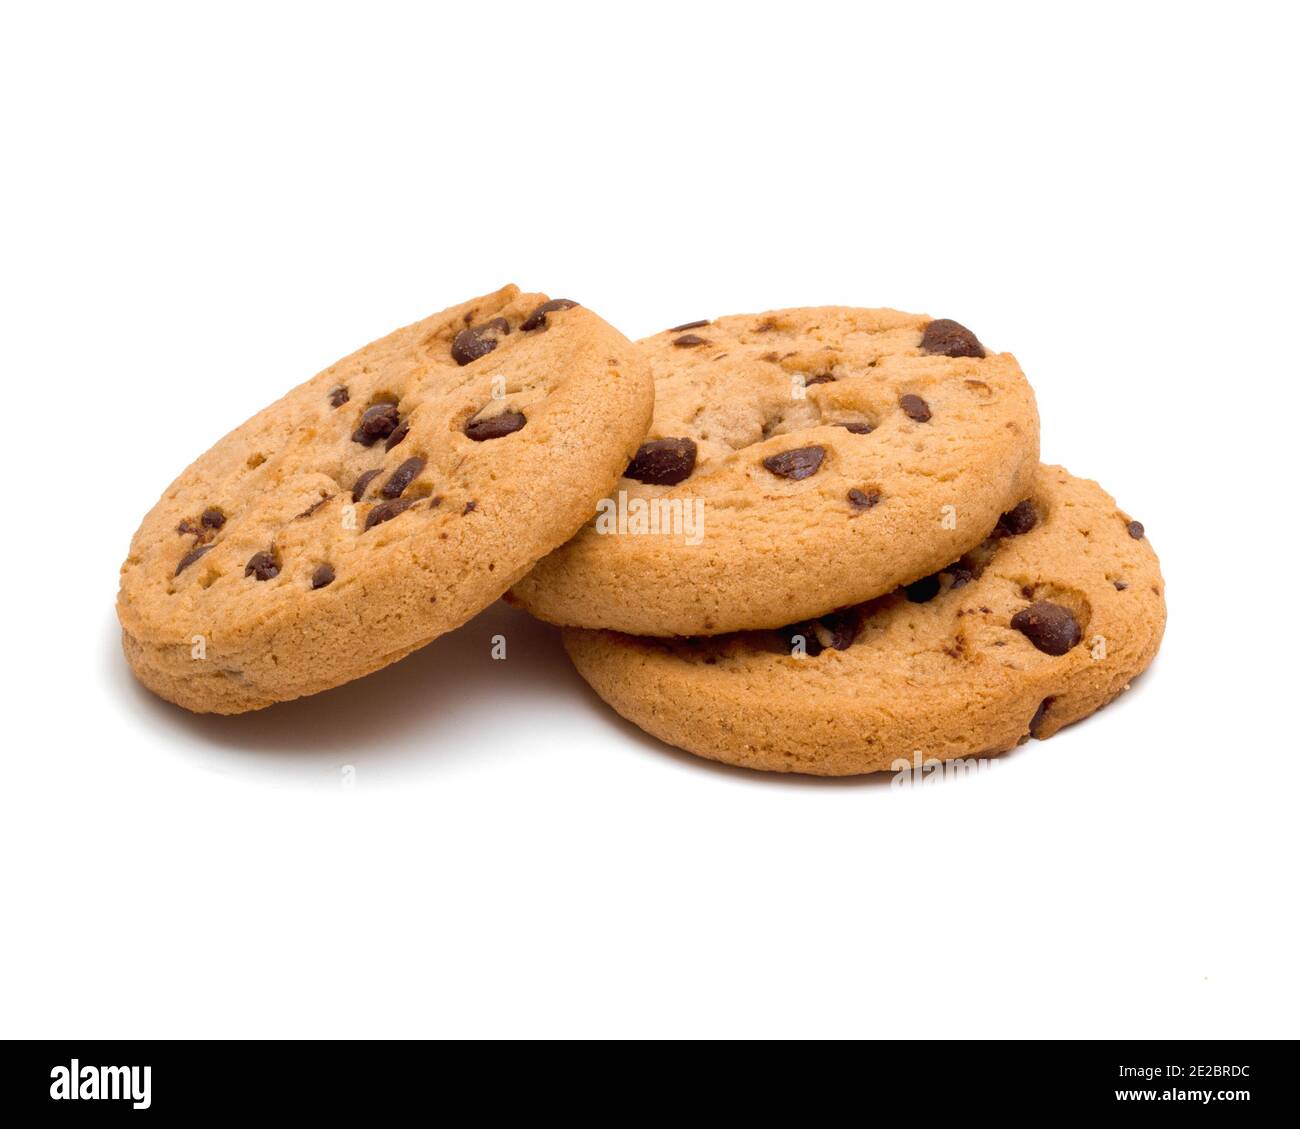 Chocolate chip cookies on white Stock Photo